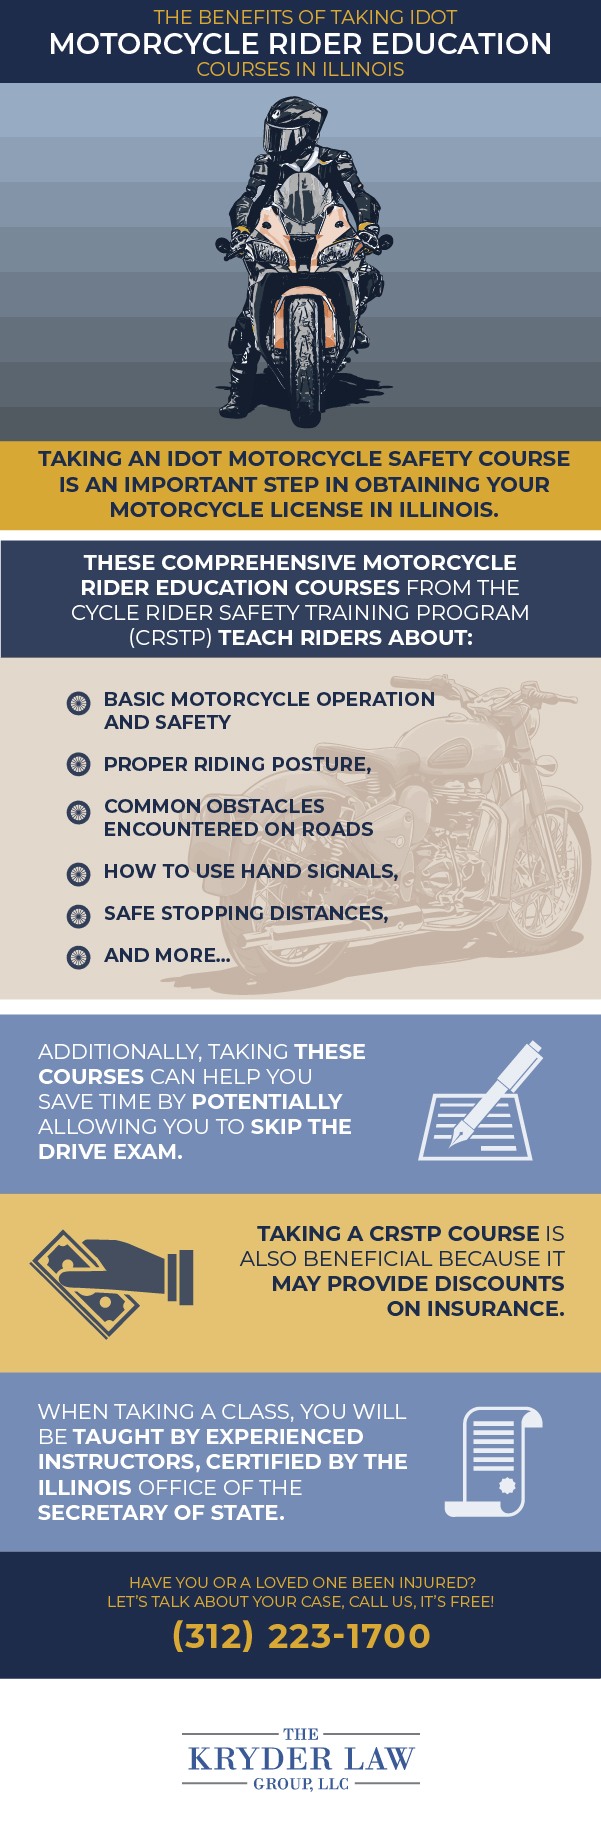 The Benefits of Taking IDOT Motorcycle Rider Education Courses in Illinois